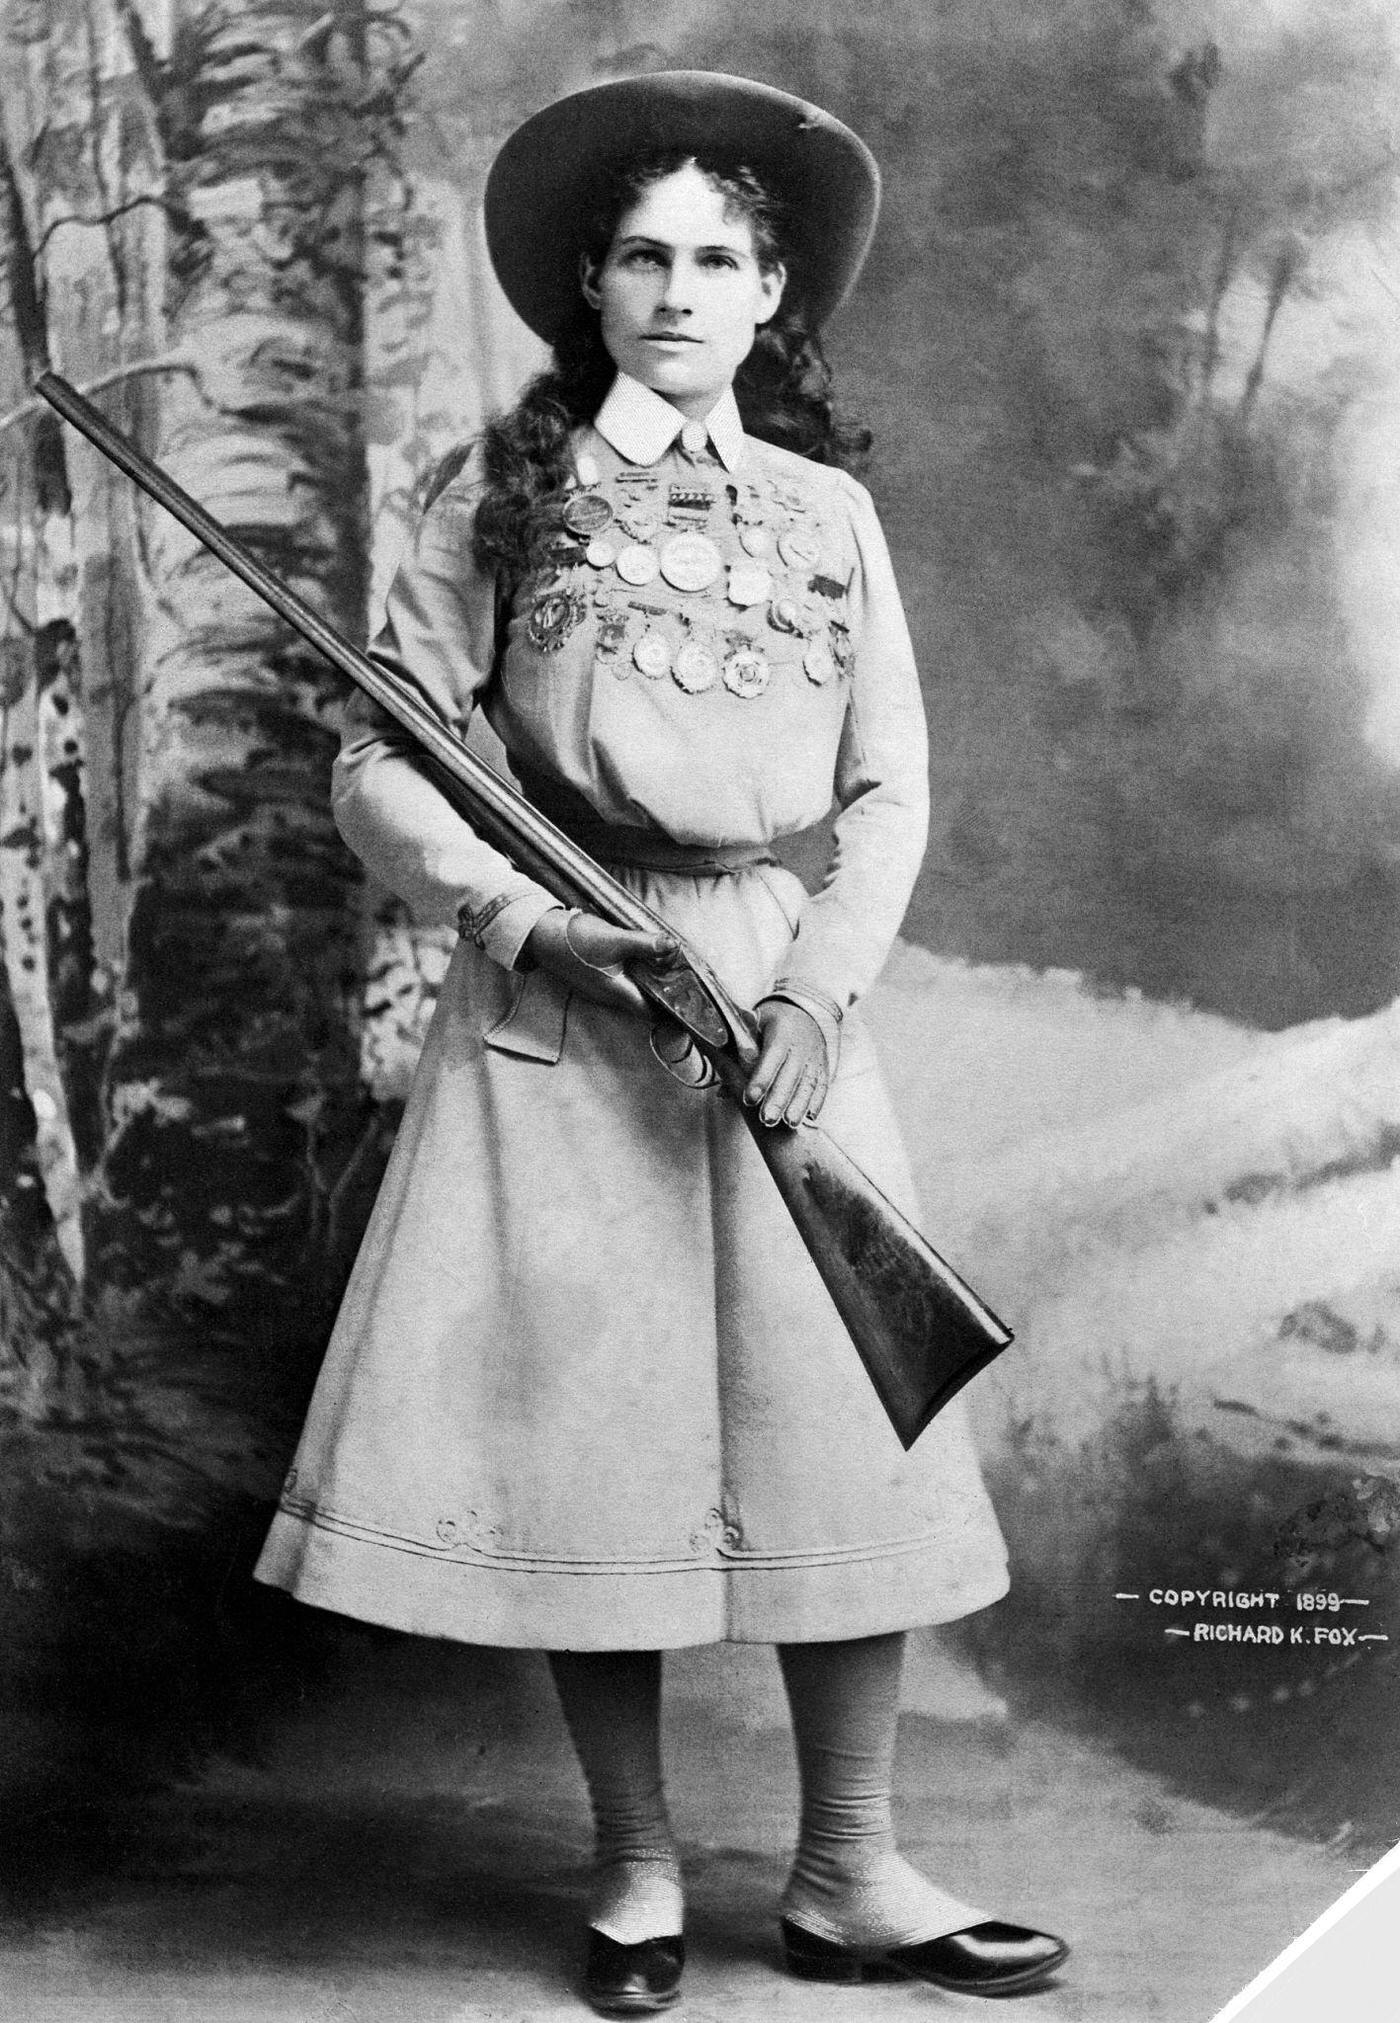 Target shooter Annie Oakley, star of Buffalo Bill's Wild West show, is shown holding a rifle.